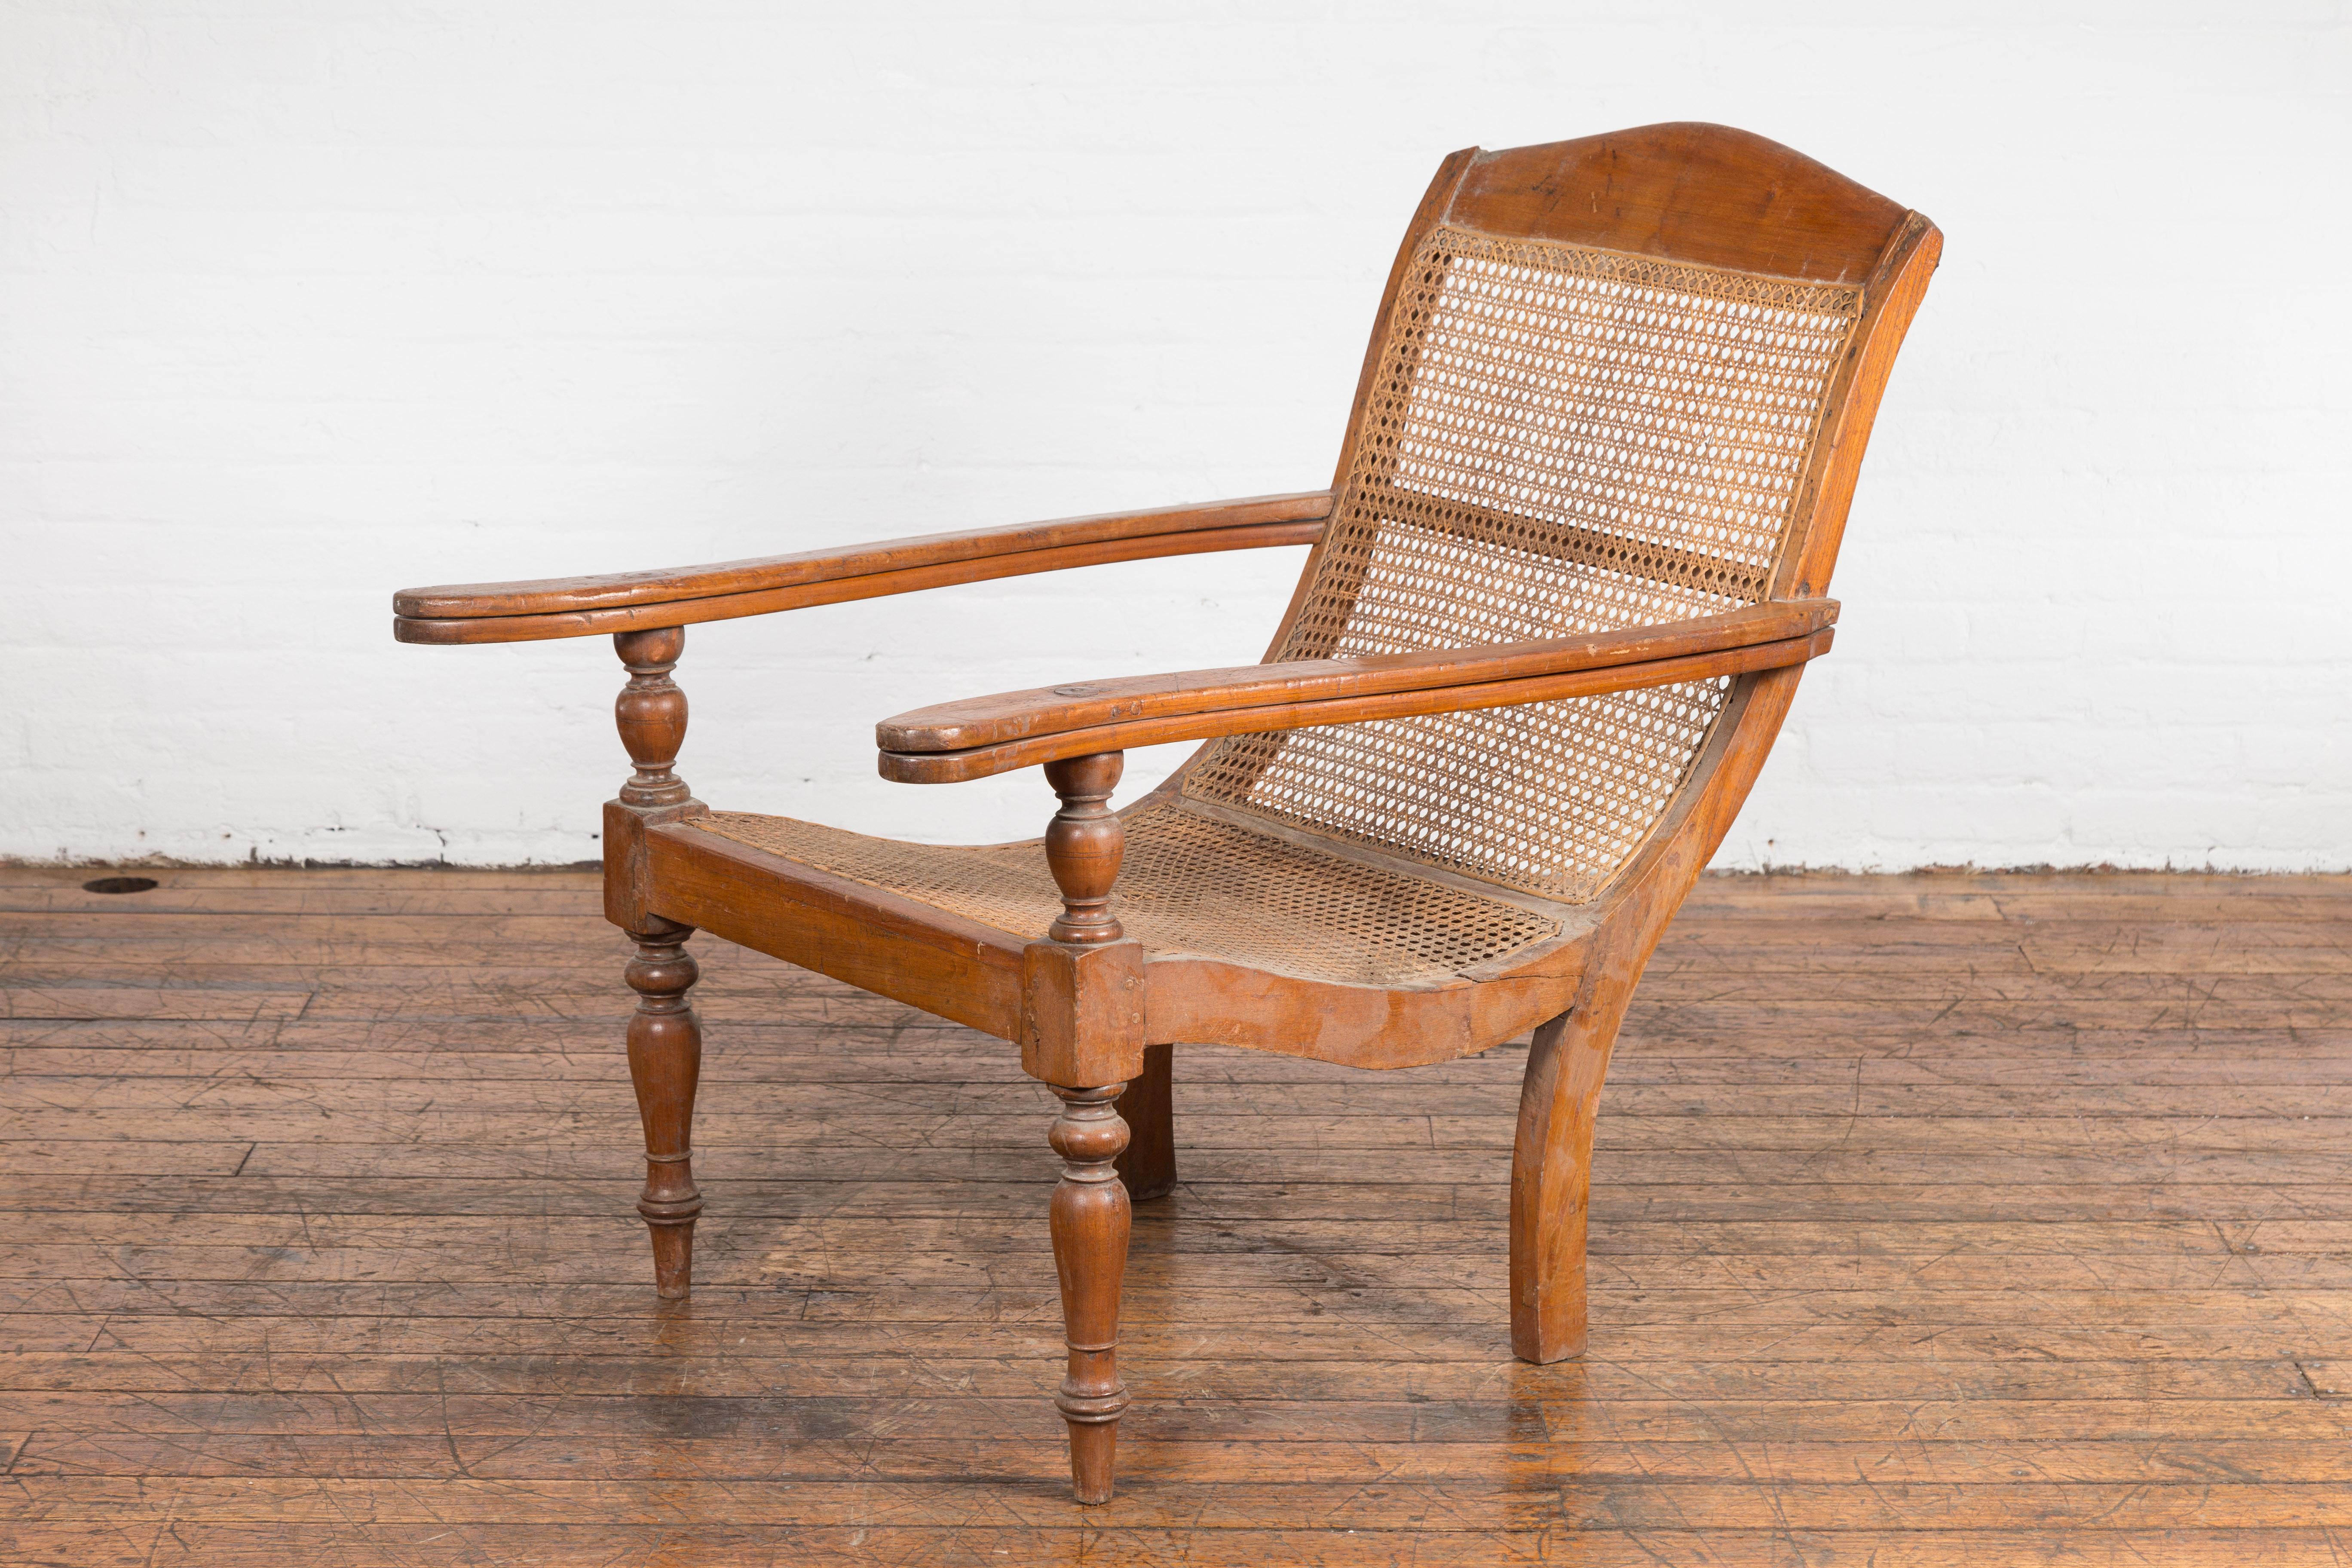 Turned Dutch Colonial Indonesian Cane and Wood Plantation Chair with Extending Arms For Sale